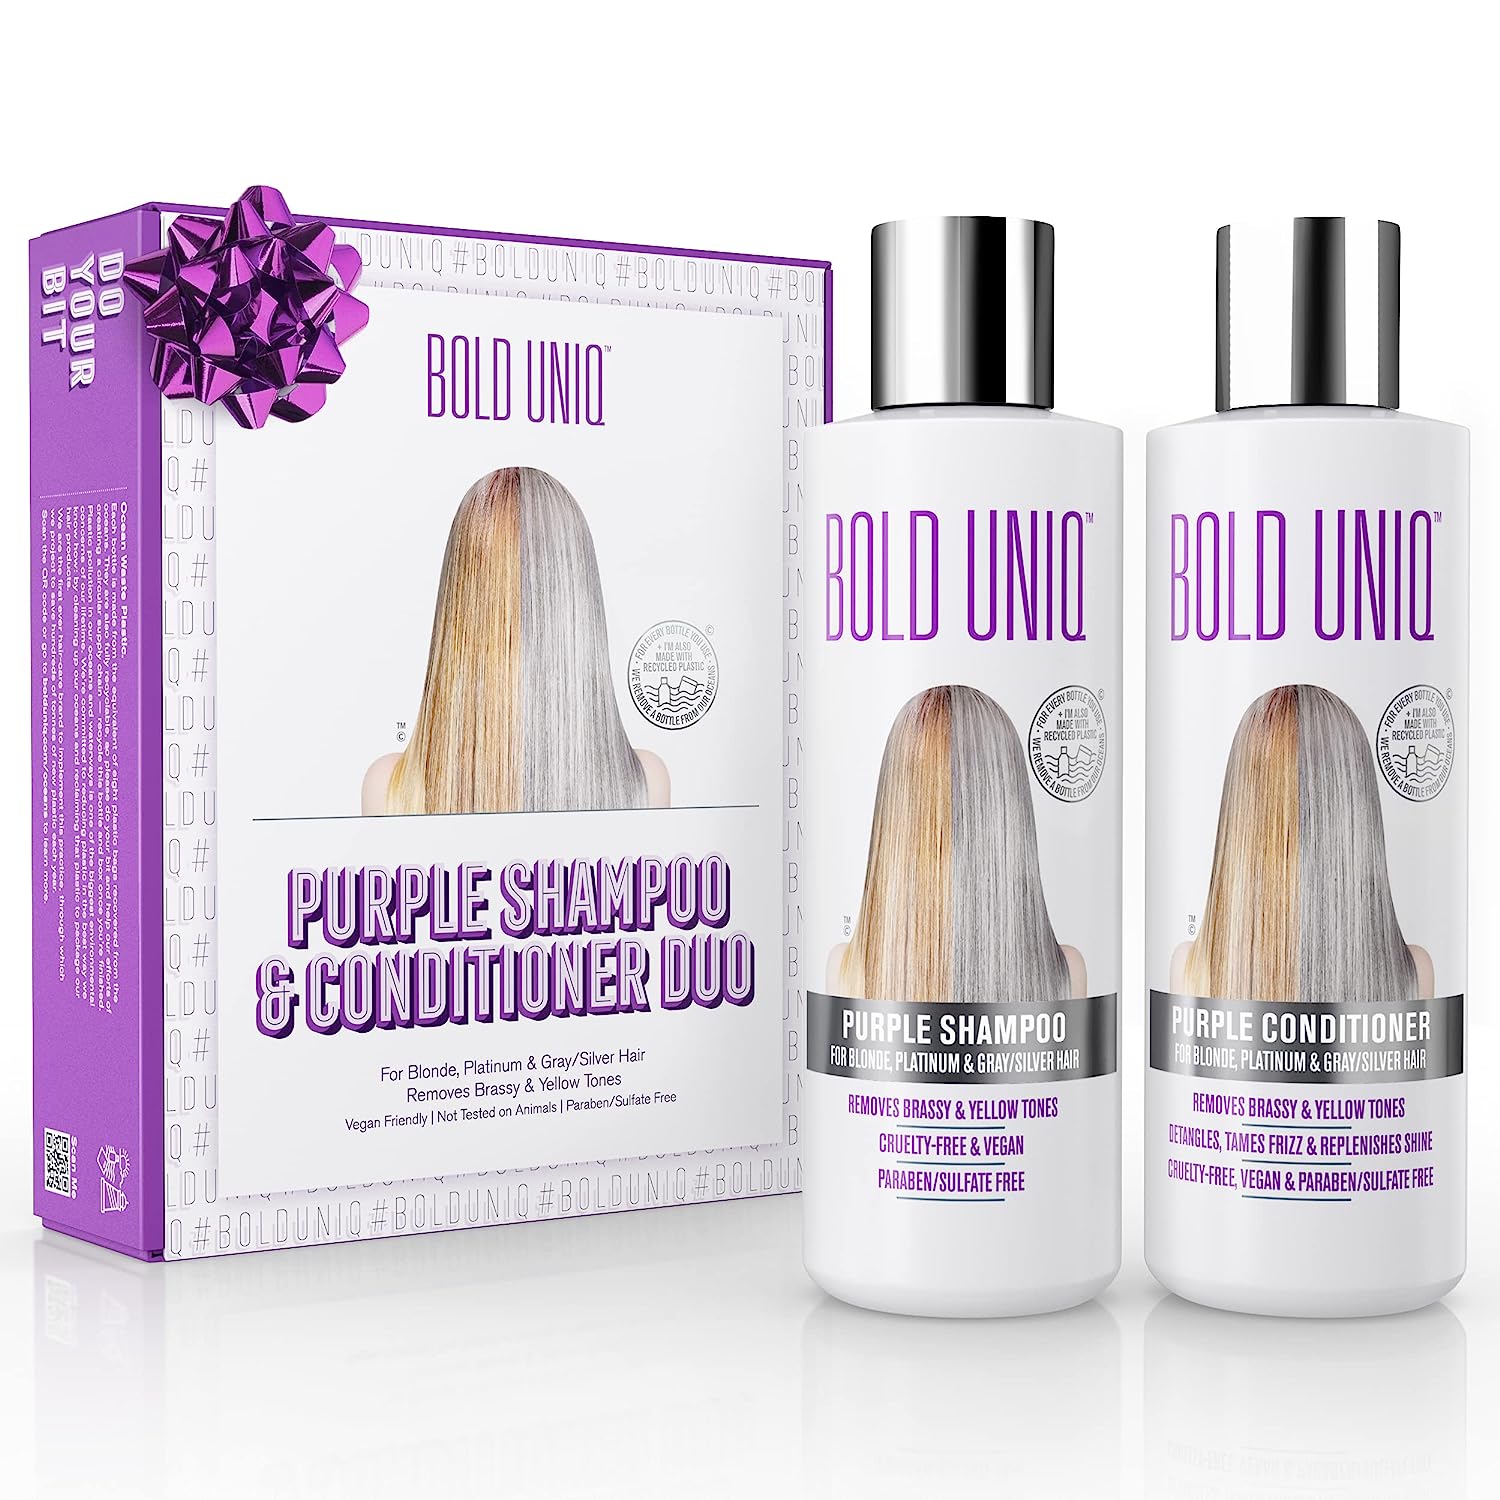 Purple Shampoo & Conditioner For Blonde Hair Duo Set. [...]